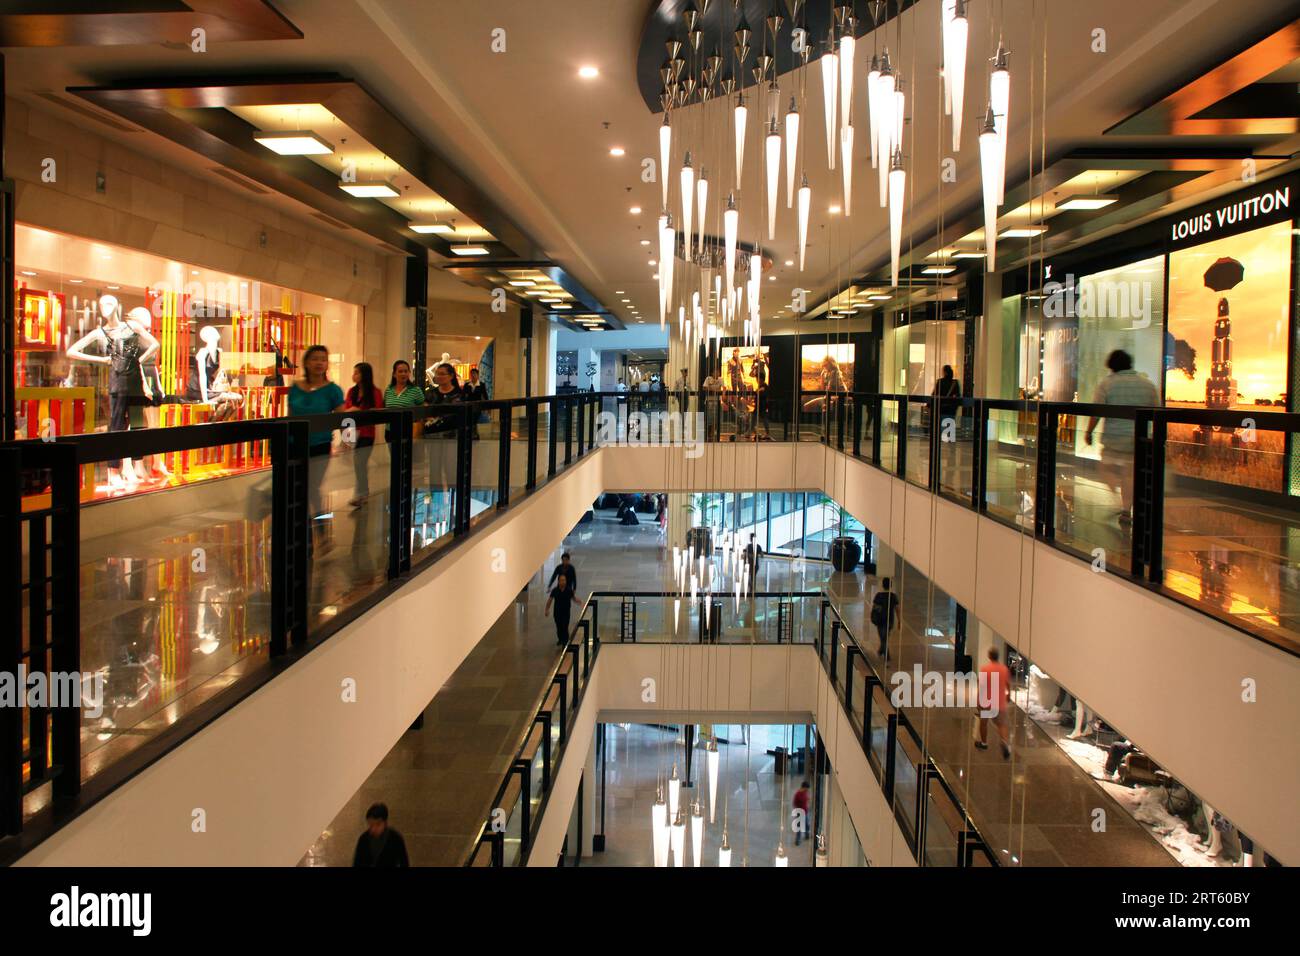 Greenbelt is a shopping mall in Makati, Manila owned by Ayala Malls News  Photo - Getty Images